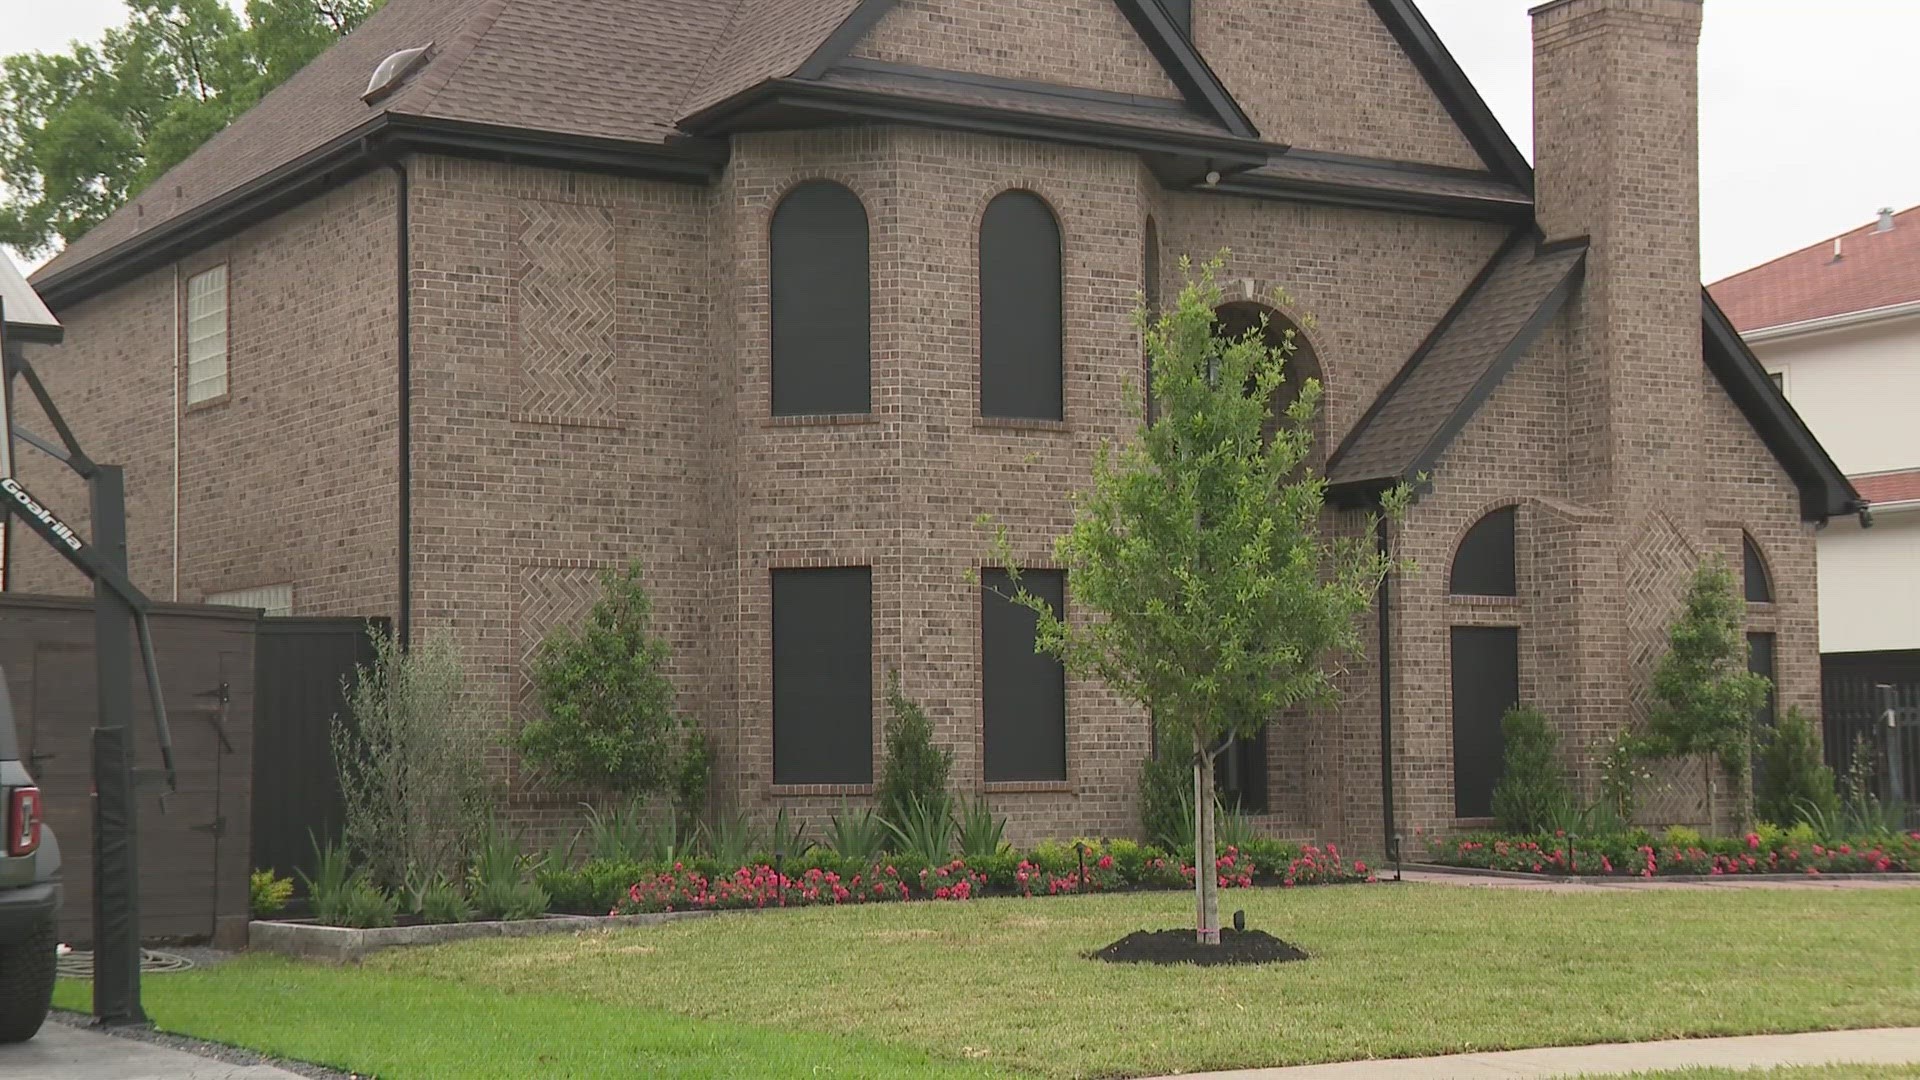 According to court documents obtained by KHOU 11 News, between Jan. 1, 2023, and April 23, 2024, Bellaire police were called to the home on Merrie Lane 40 times.